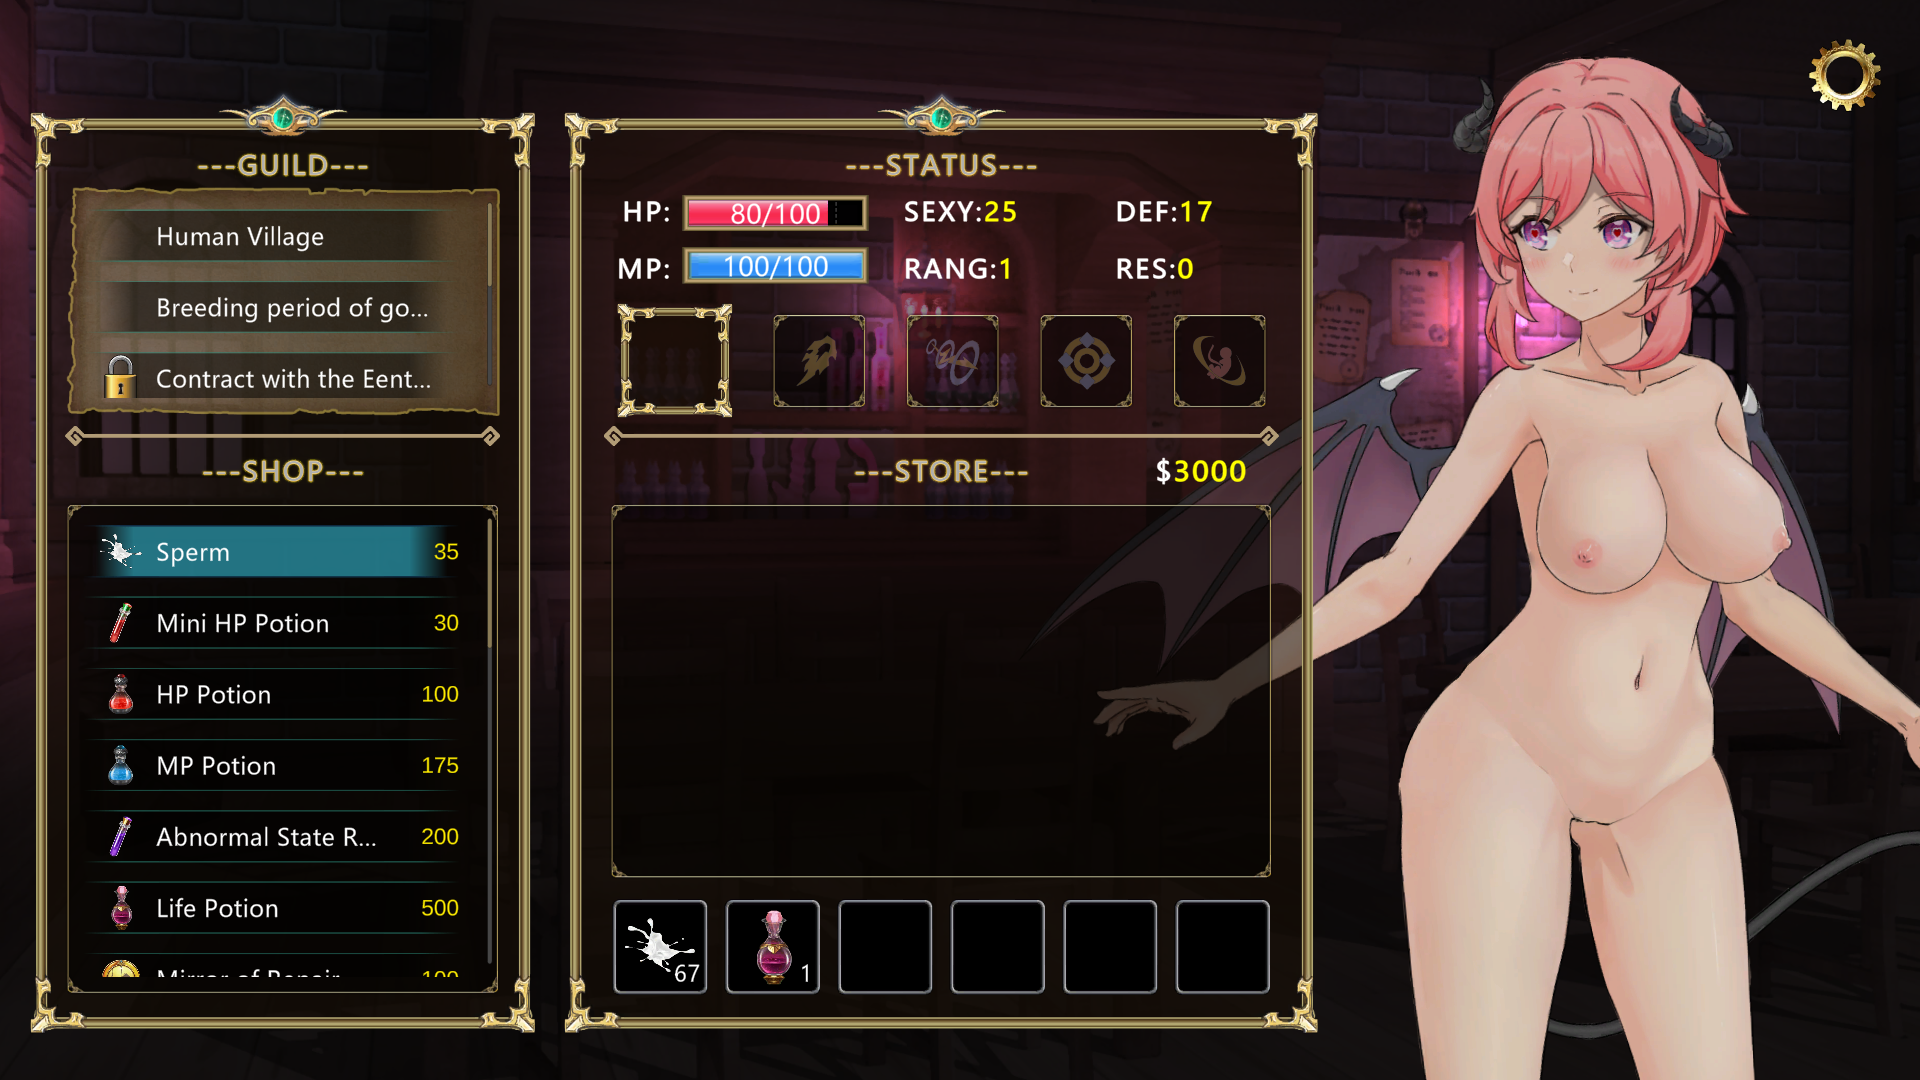 Succubus Adventure COMPLETED - free game download, reviews, mega image